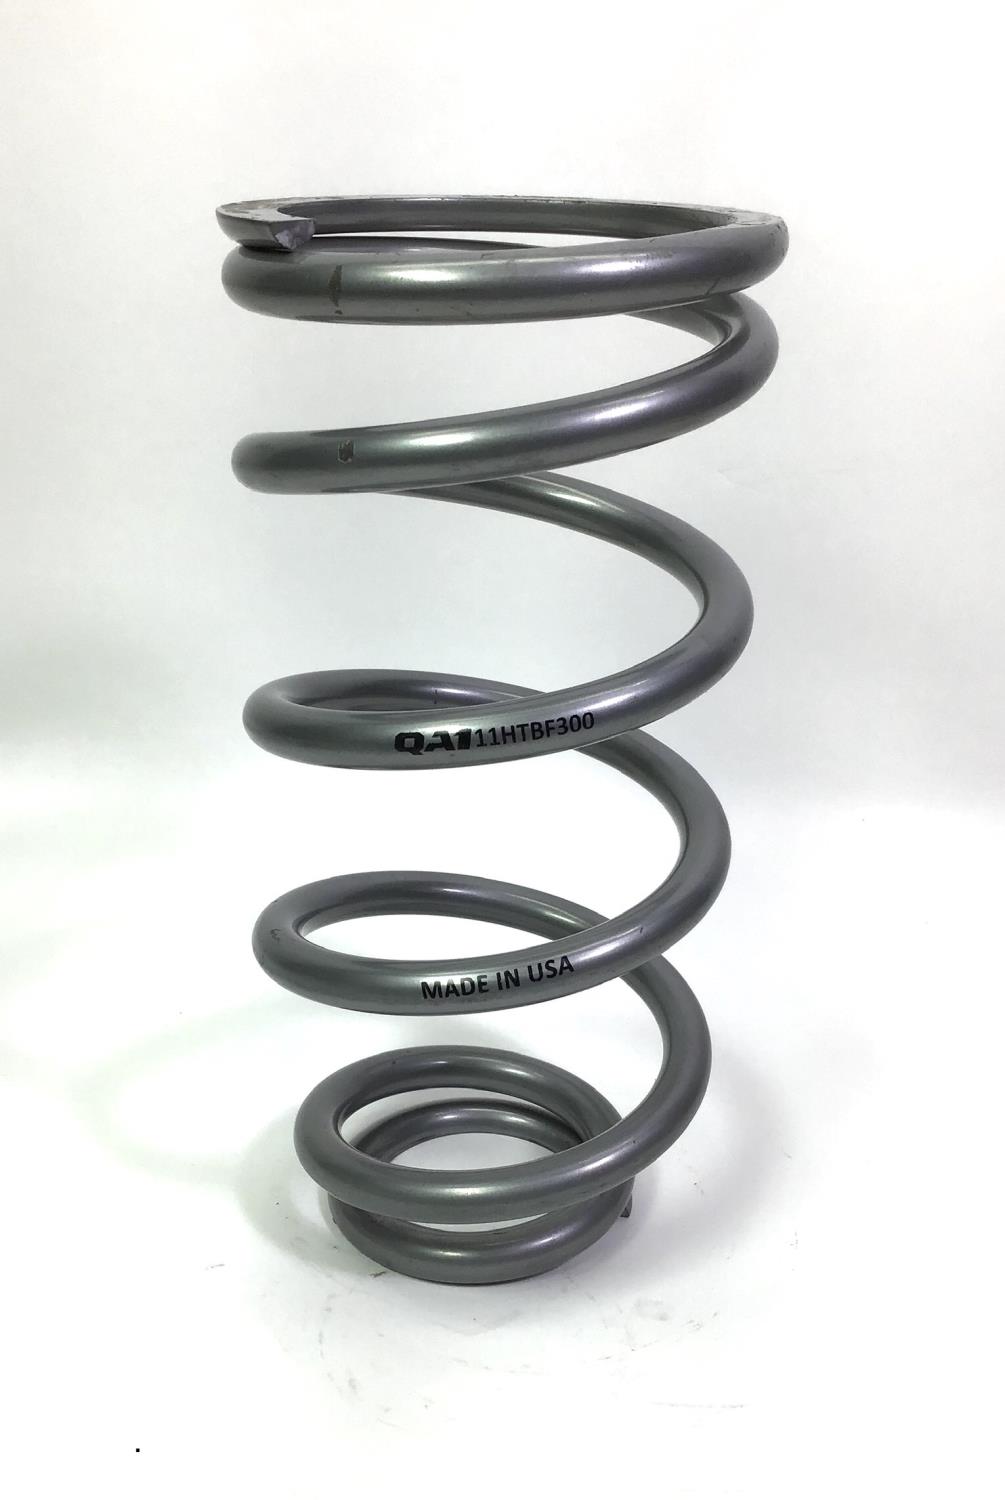 *BLEMISHED Powder-coated Tapered High Travel Coil Spring 11